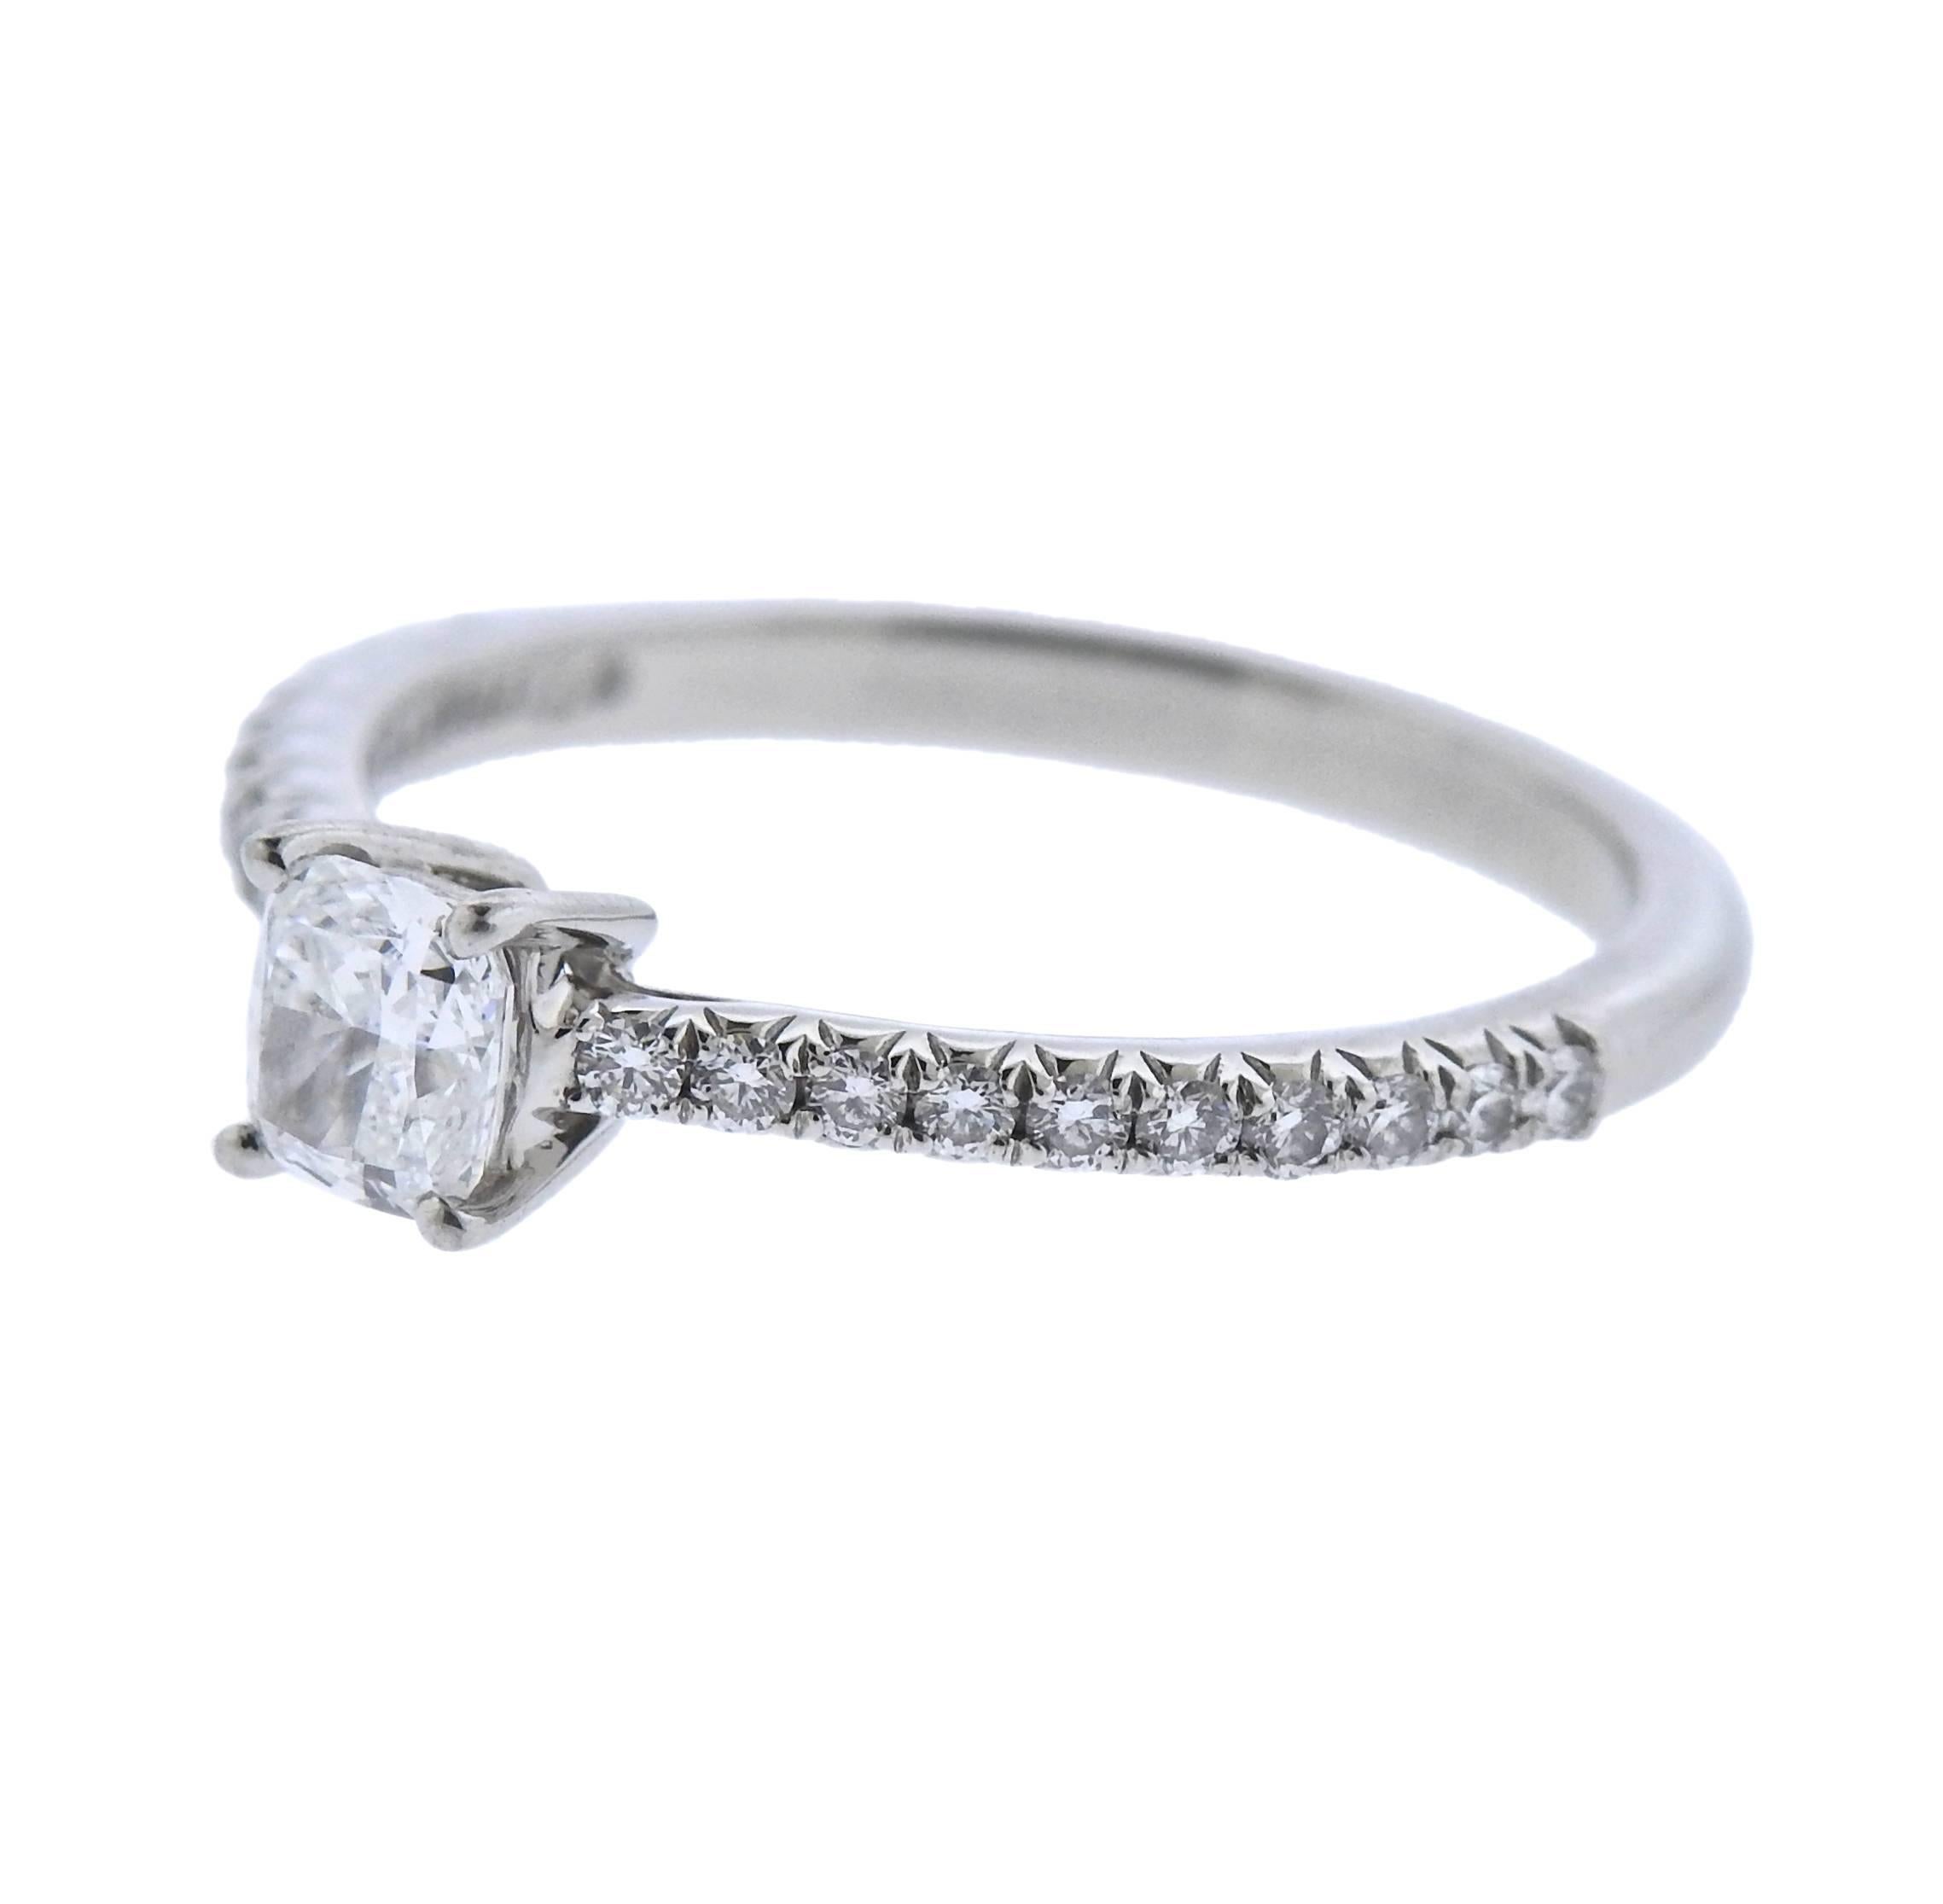  Classic platinum engagement ring, crafted by Tiffany & Co, set with a 0.41ct F/VS1 cushion diamond, surrounded with approx. 0.16ctw in side setting diamonds. Comes with Tiffany & Co Retail Replacement Valuation Paperwork from 2017 of $4960. Ring